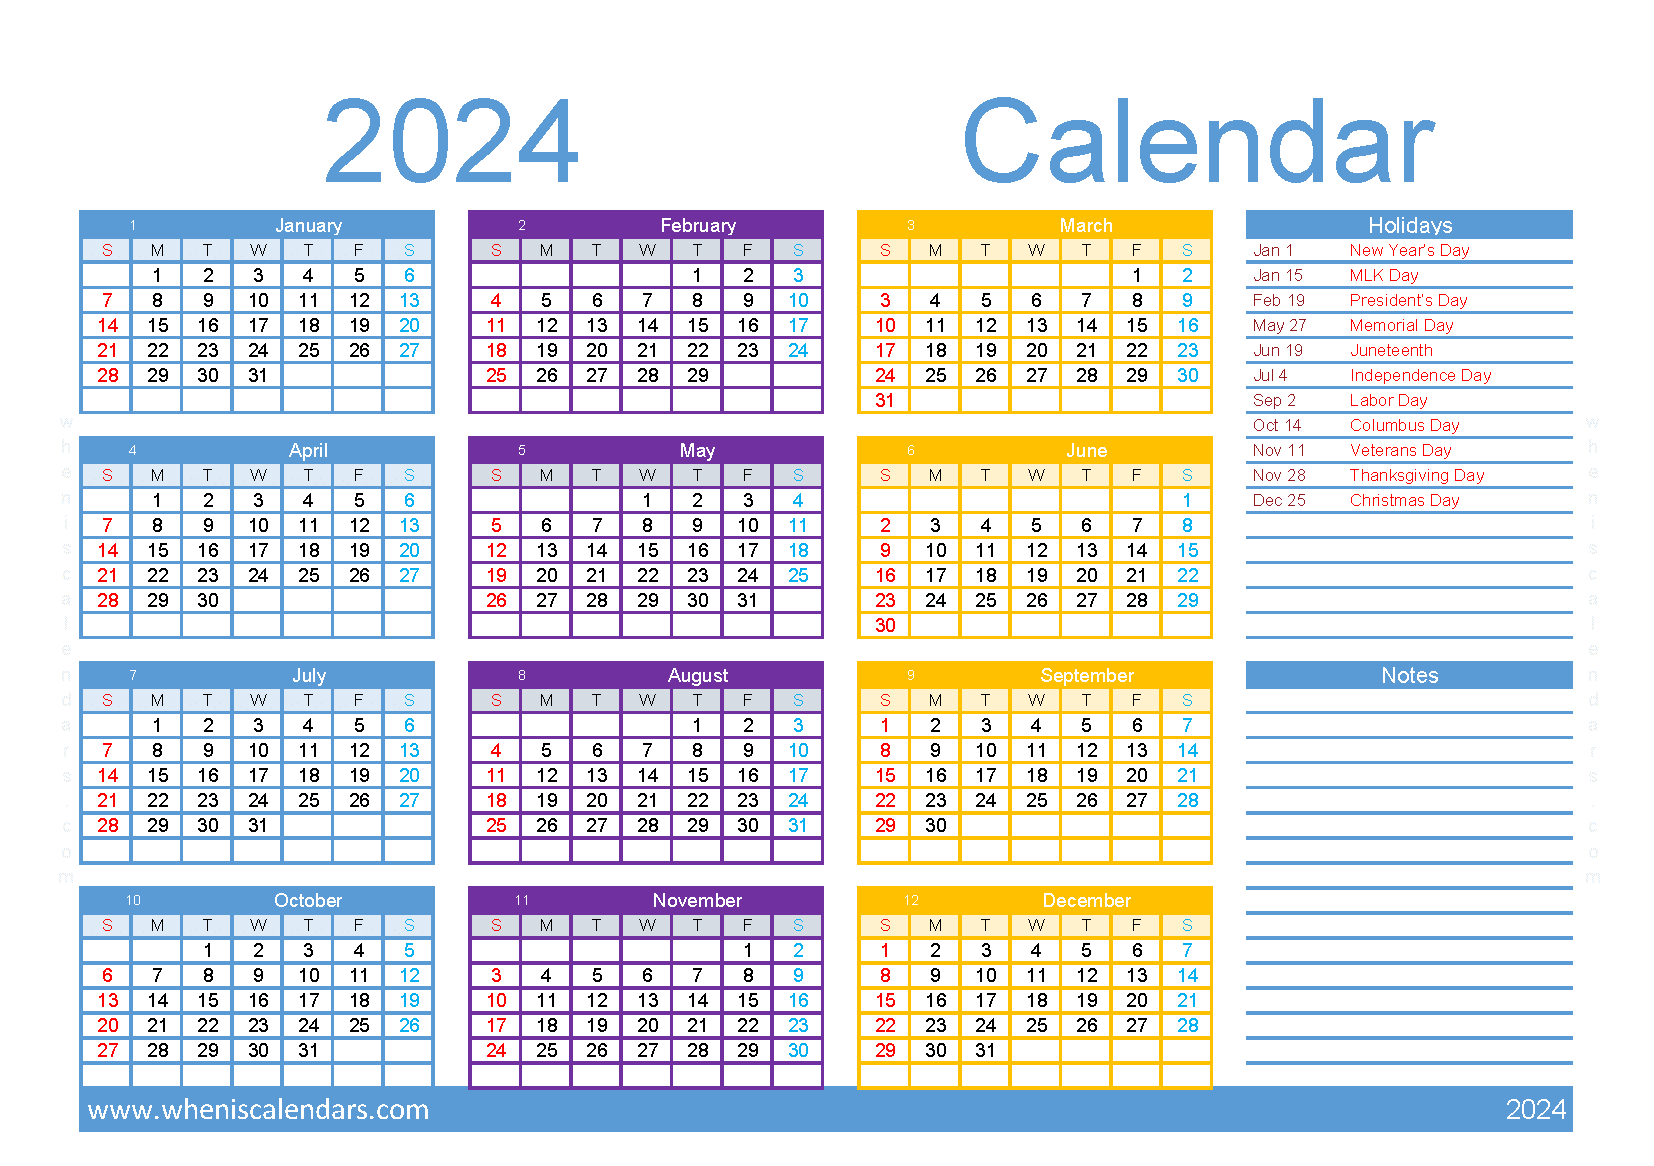 Download free 2024 Calendar with Holidays printable A5 in horizontal landscape